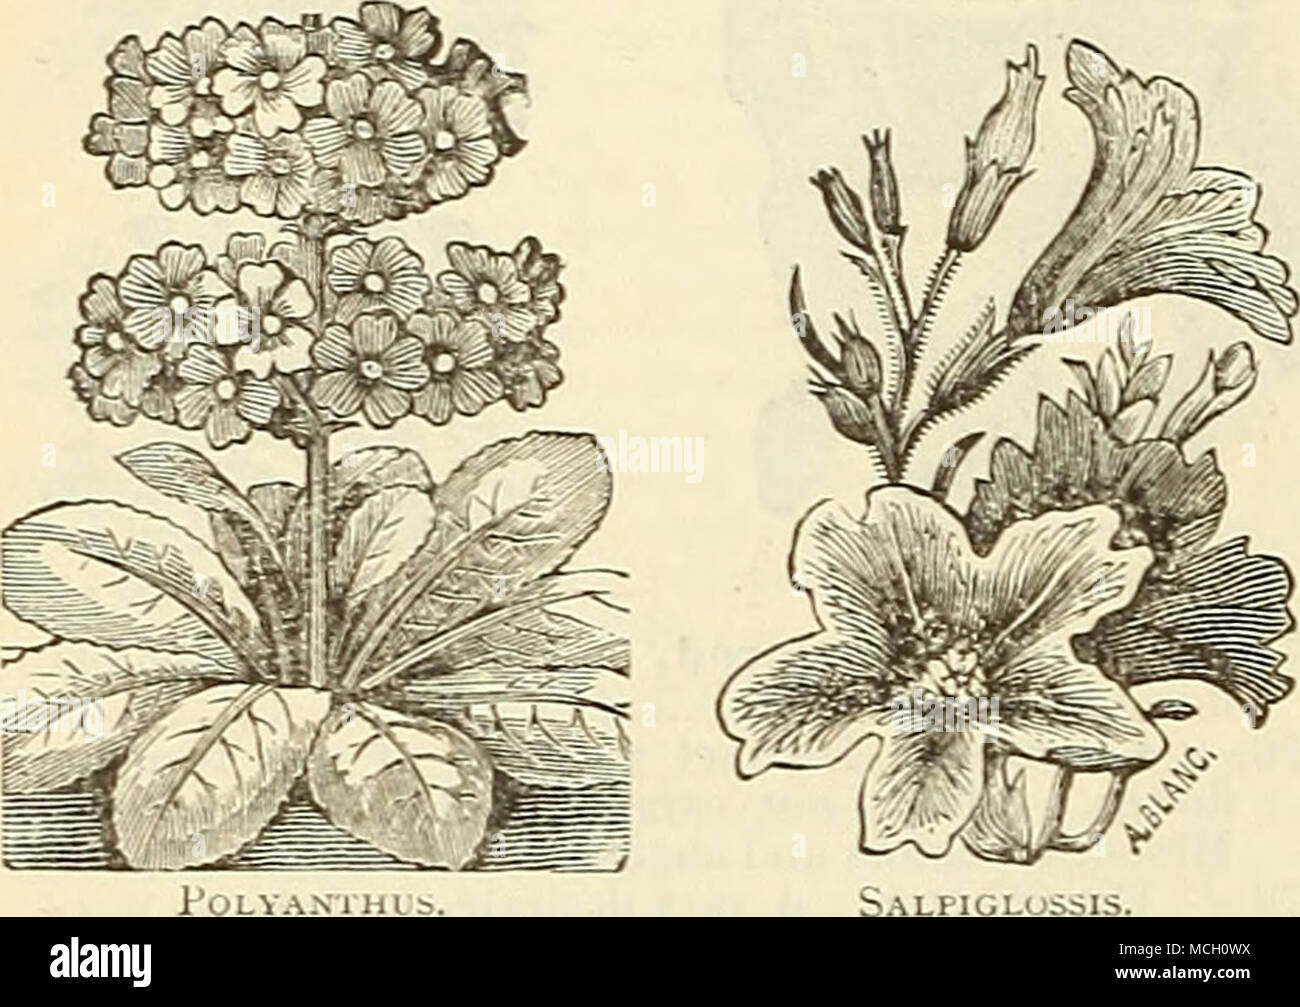 . bALPIGLUSSlS. PRIMULA SIN. FIM. FL. PL. (Double Chinese Primrose.) The followiuiT double-frin'.;ed Cliinese Primroses are viTv fine and can be highlv recommended ; 6 inches. 64J8 P. Alba. Double white 50 6450— Double Mixed. All colors 50 6429 Collection of Primula Sin., 12 fringed varieties.§1.25 6439 &quot; &quot; &quot; &quot; 6 '' &quot; 75 6449 &quot; &quot; &quot; &quot; 6 double flowermg..l.25 PYRETHRUM. (Golden Feather Varieties.) Handsome herbaceous i)lanis, of easy culture; valu- able for margins, beds, etc. Sow from December to April in a temperature of 60 degrees ; hardy perennial Stock Photo